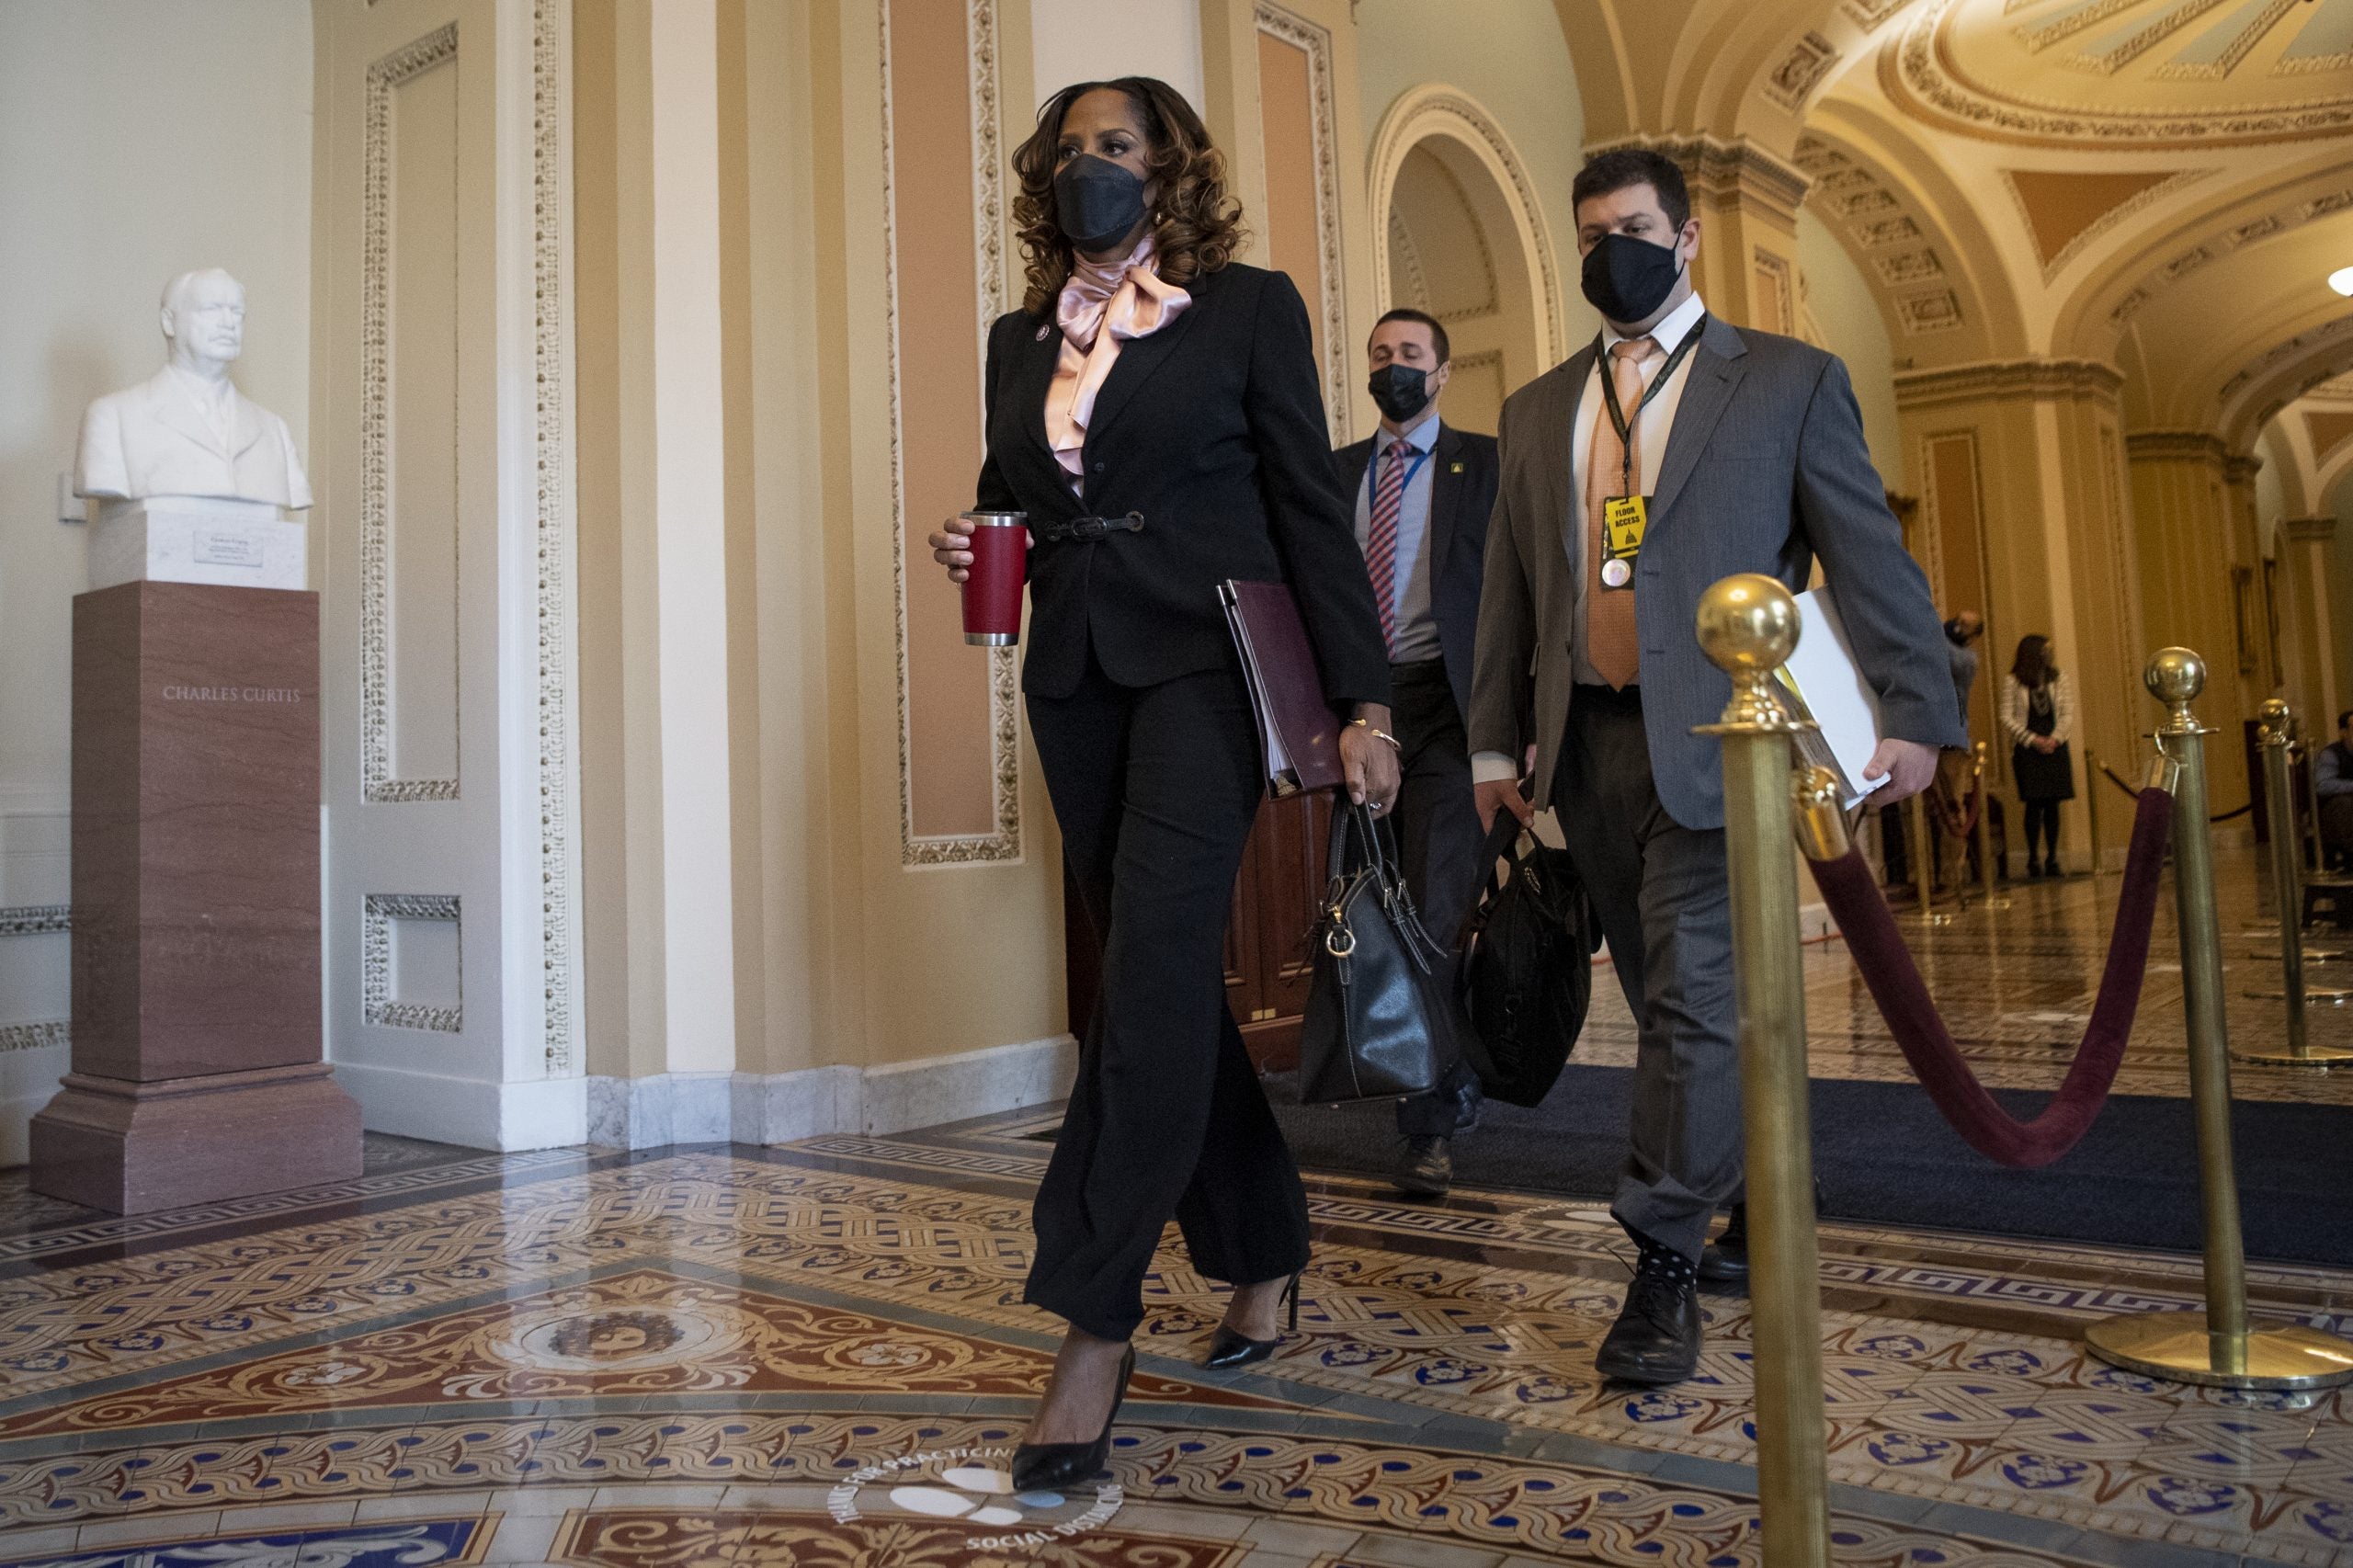 4 Things To Know About U.S. Congresswoman Stacey Plaskett